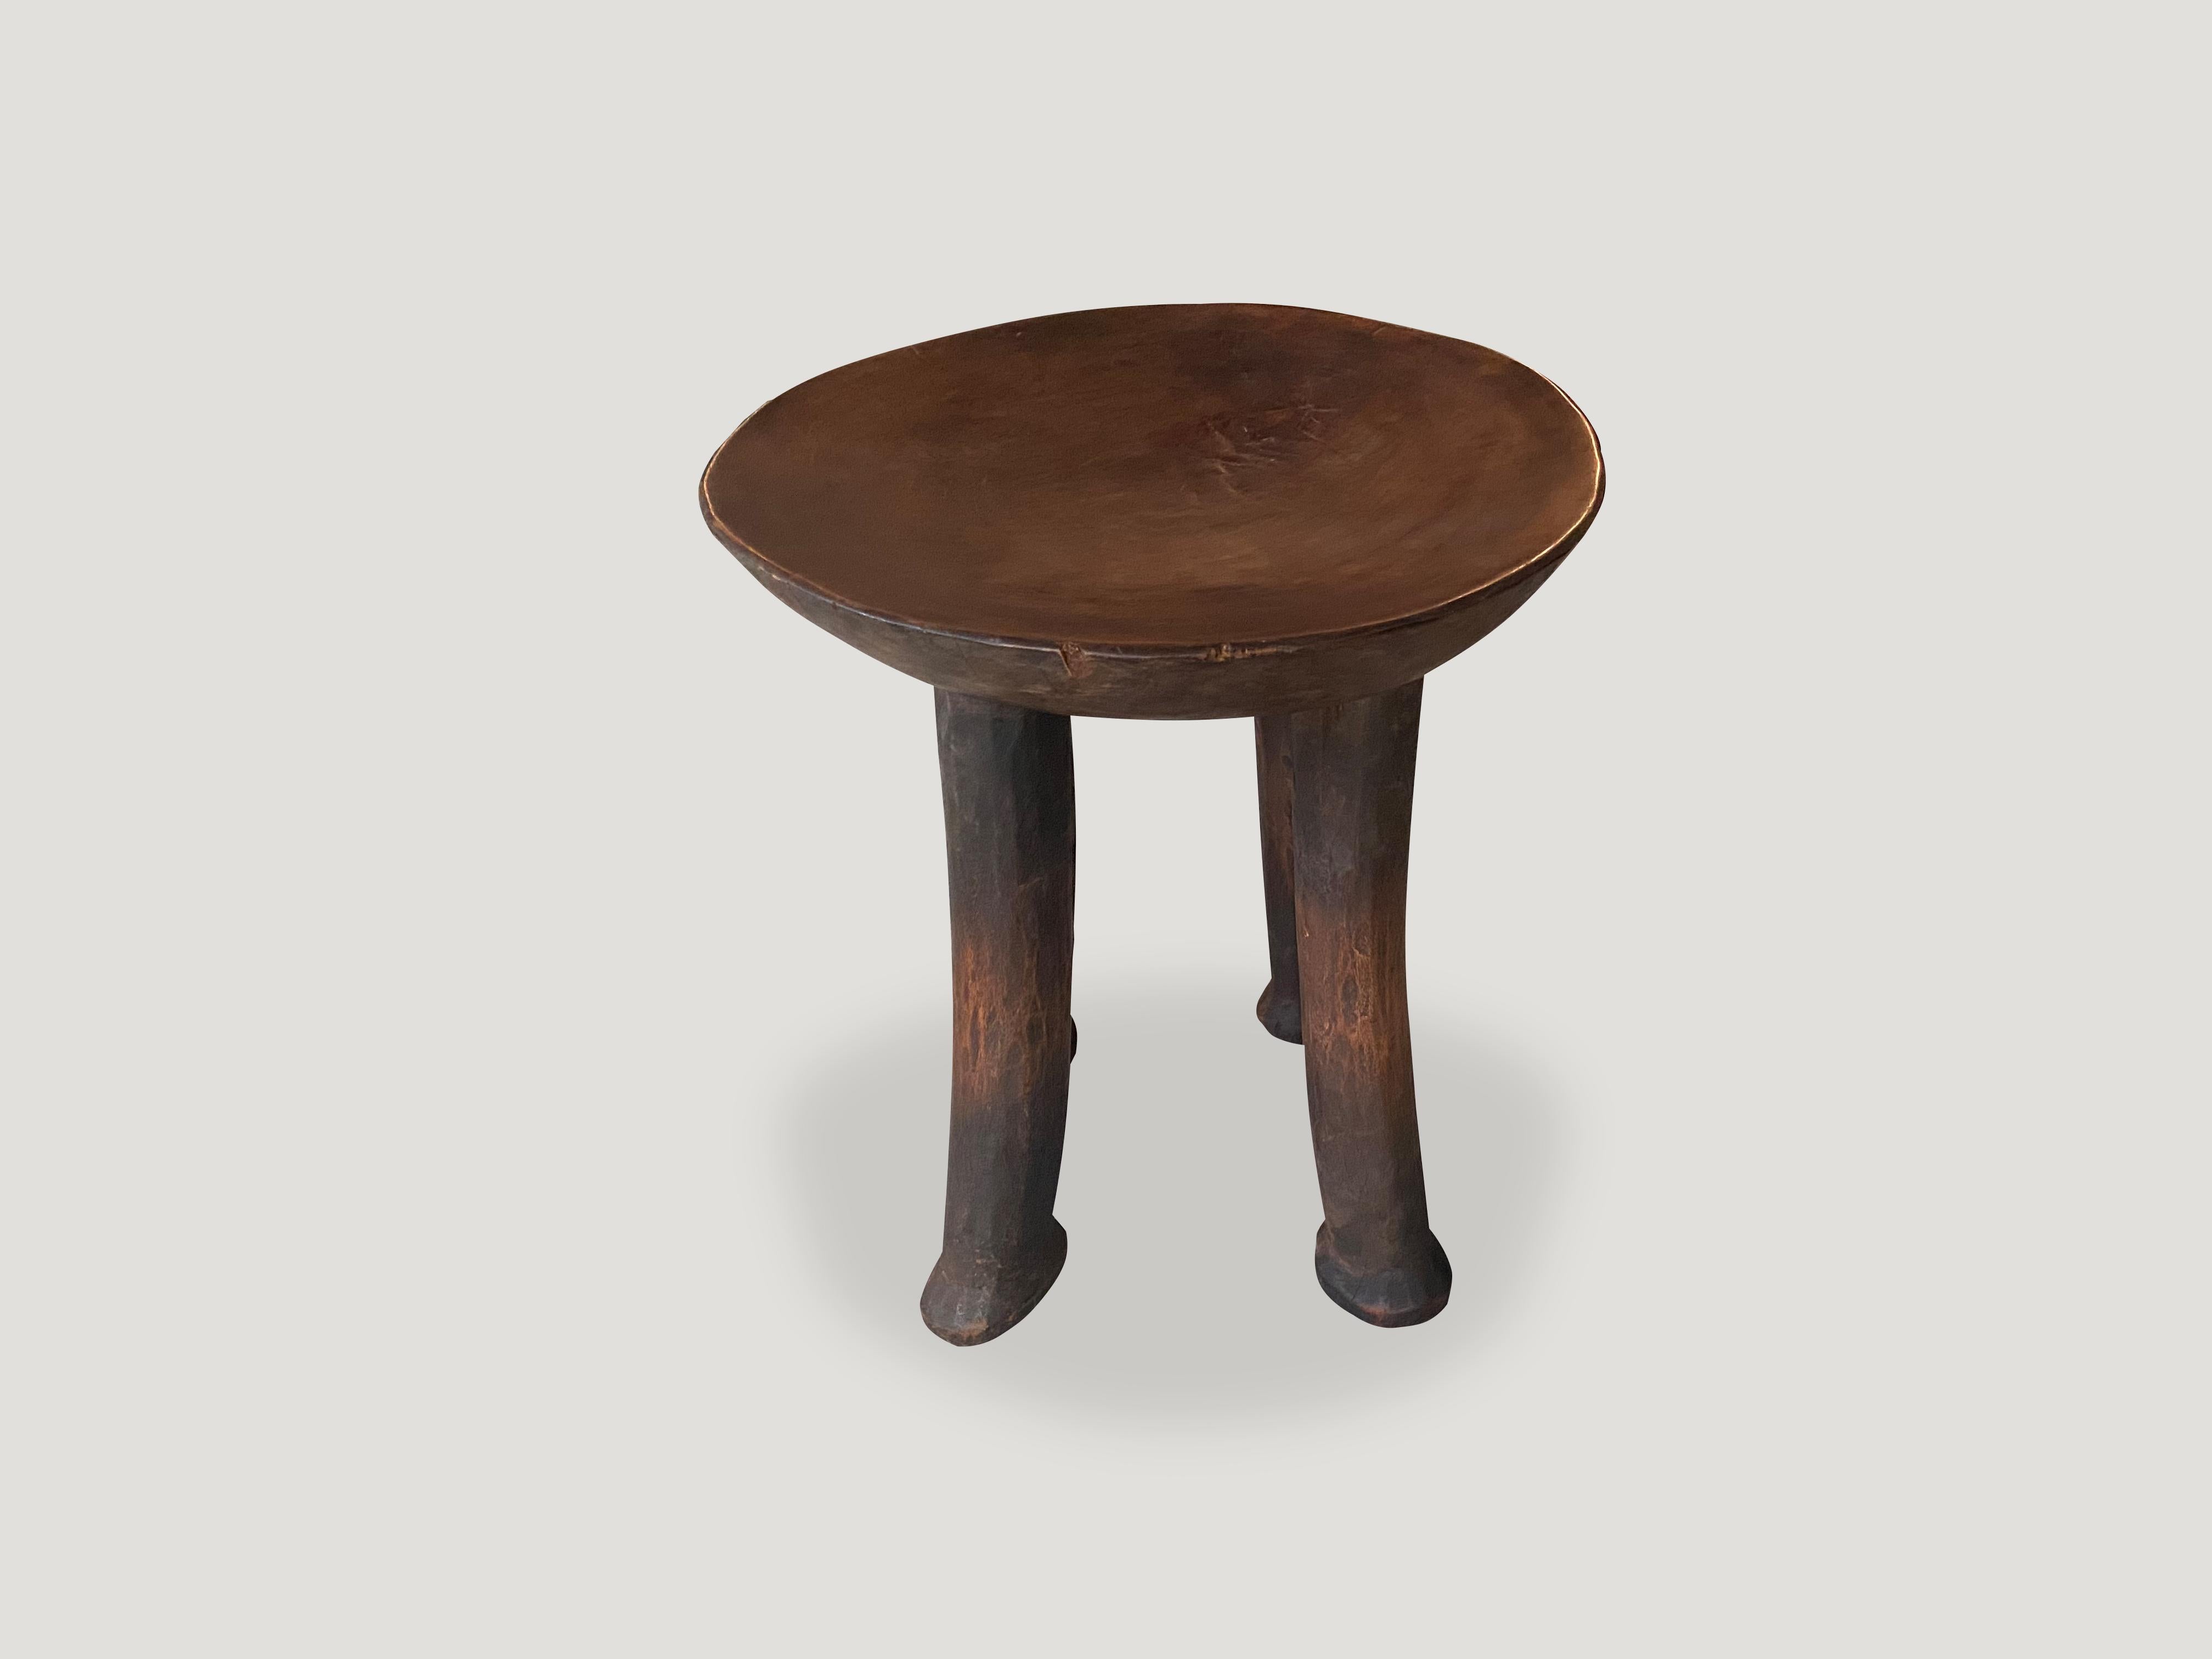 Andrianna Shamaris Antique Mahogany Wood African Stool or Side Table 1